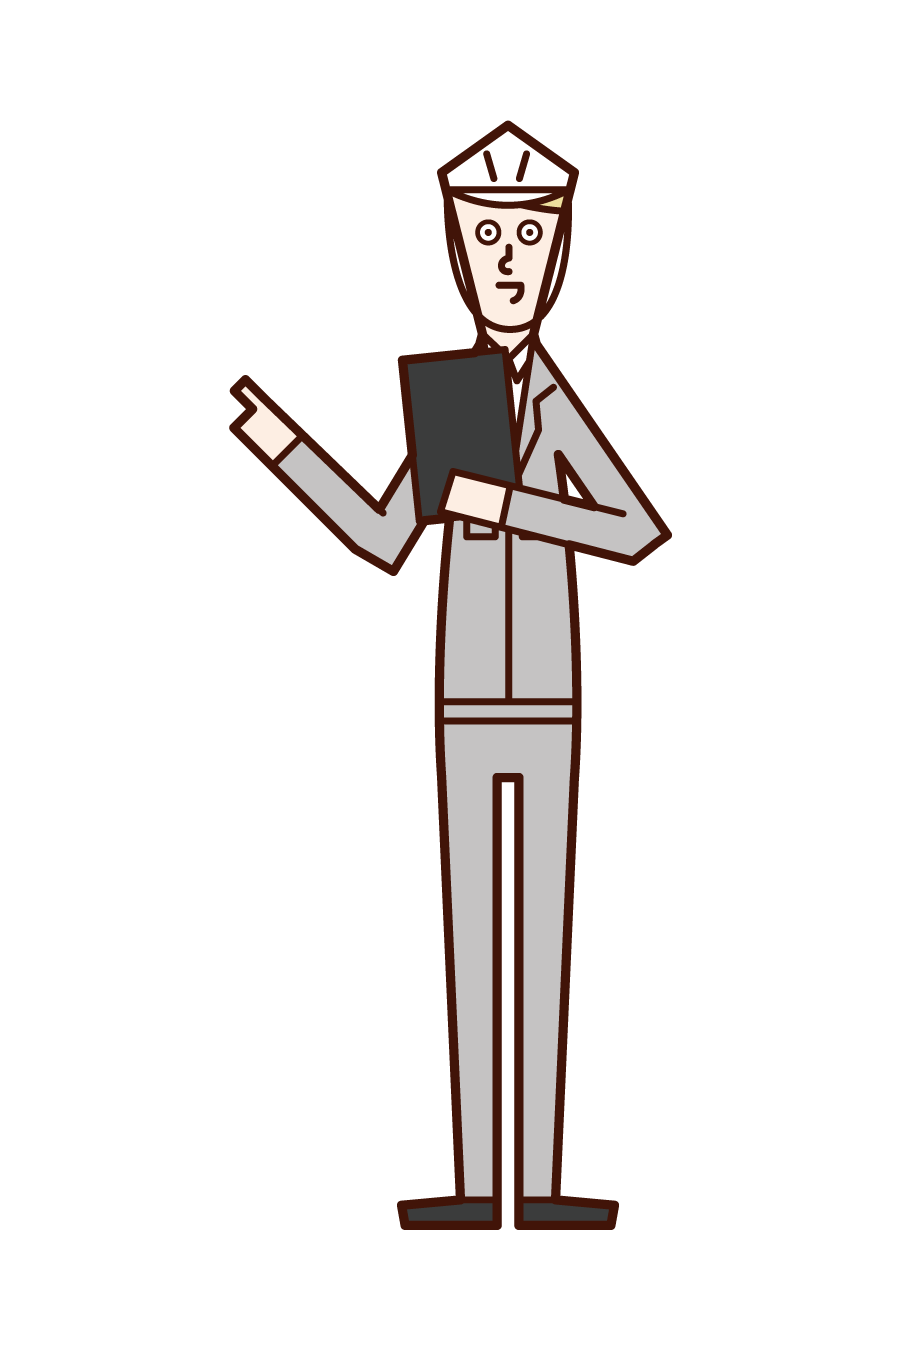 Illustration of a person (man) who confirms safety and calls